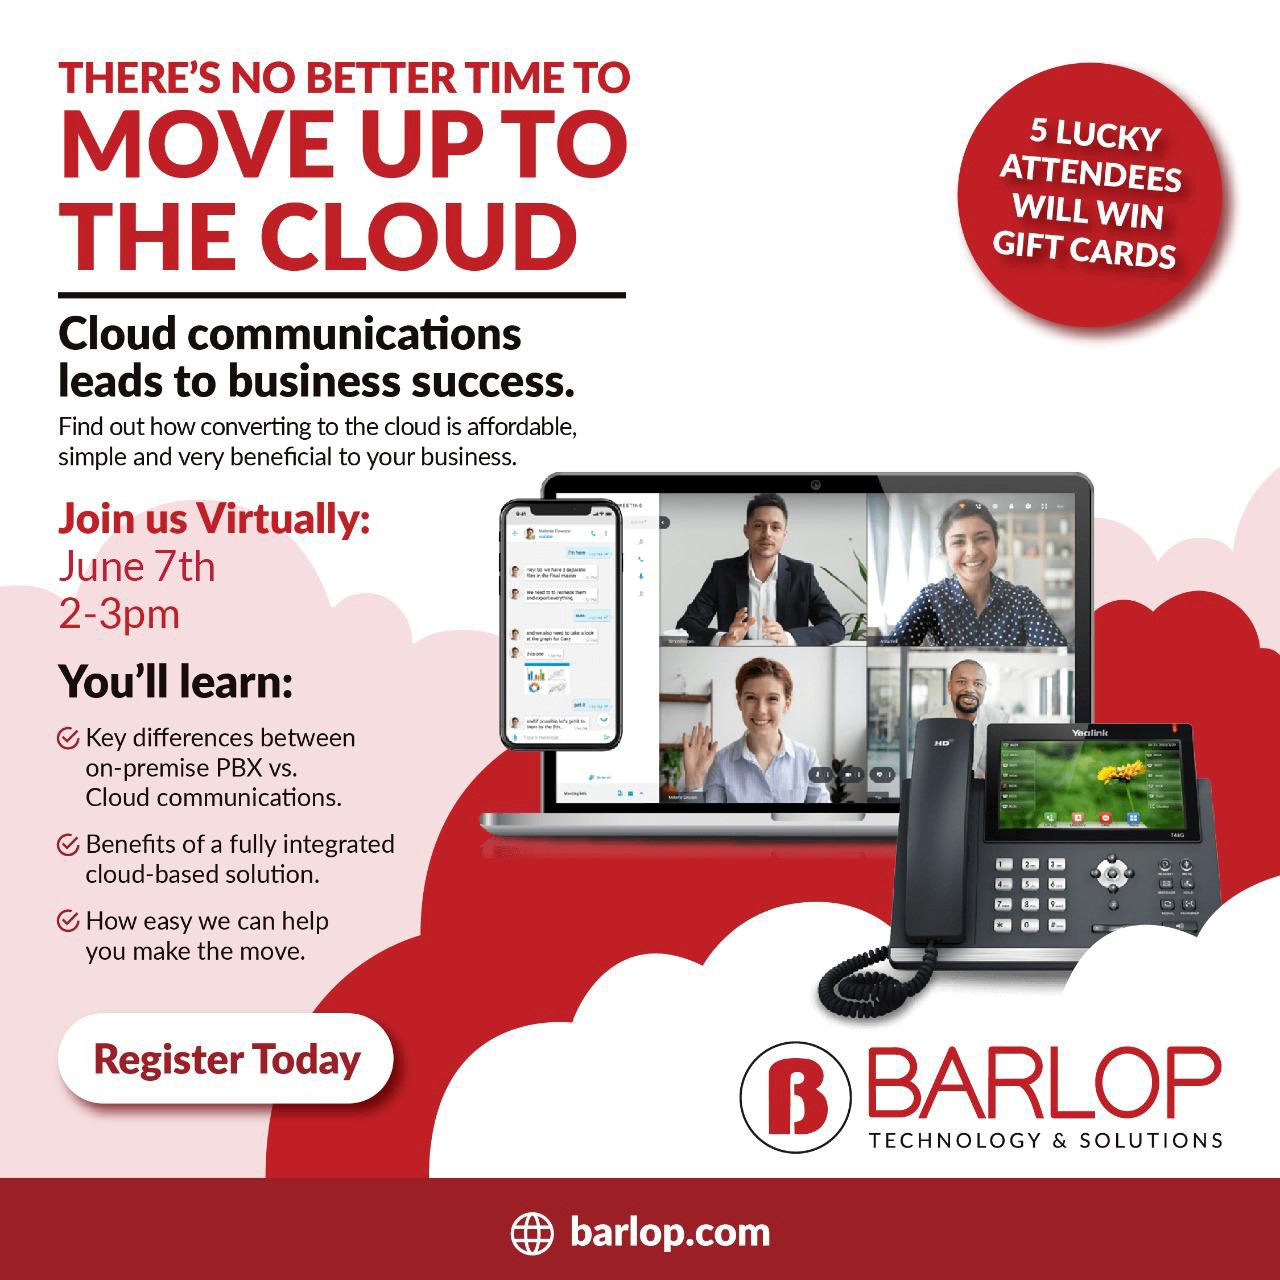 Barlop Business Systems in Florida - Unified Communications